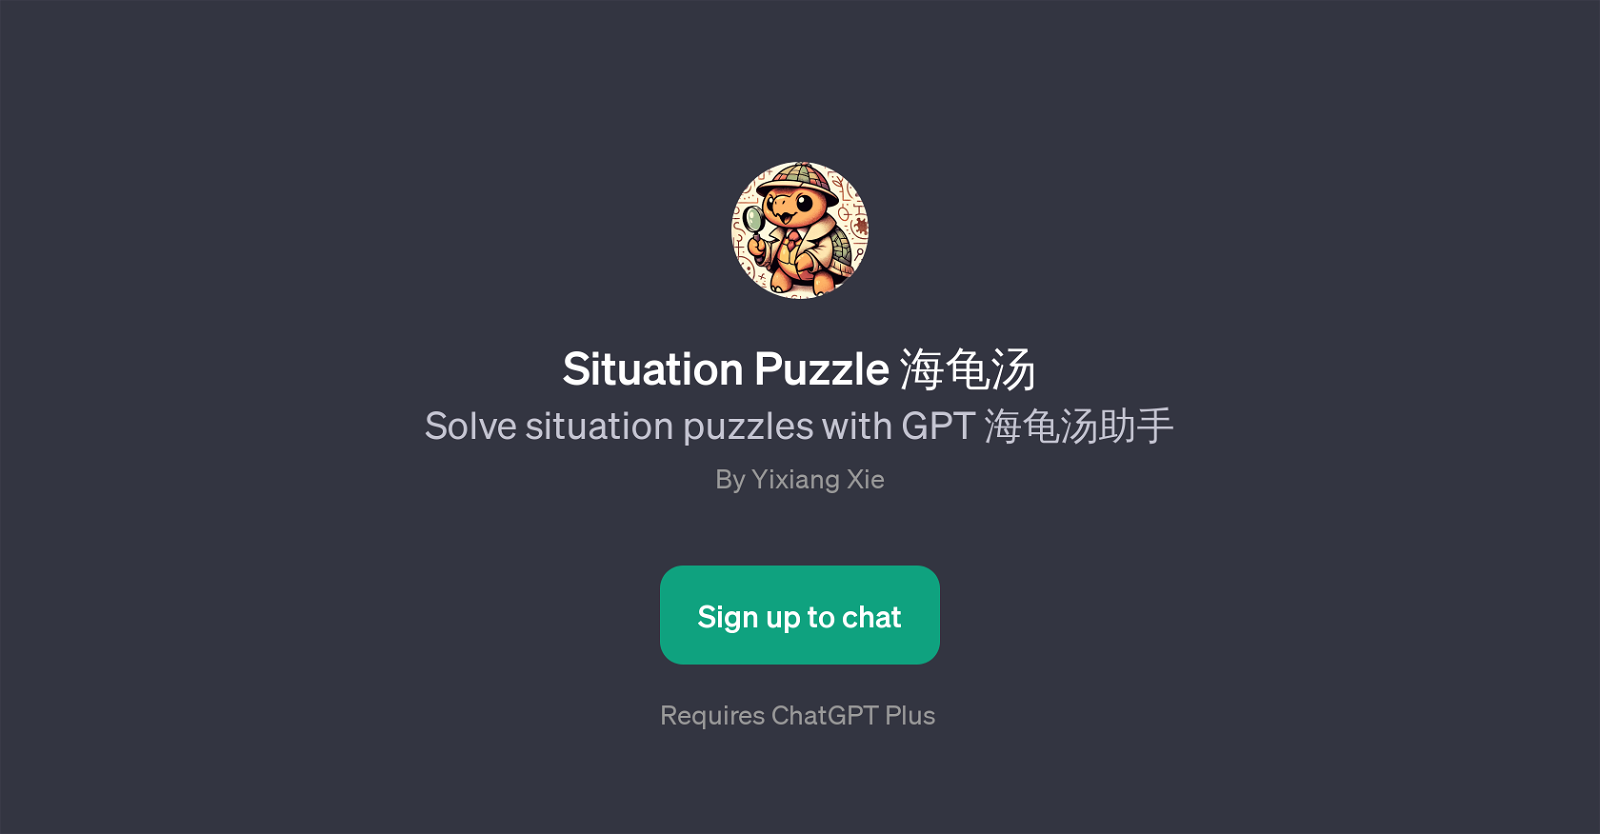 Situation Puzzle website